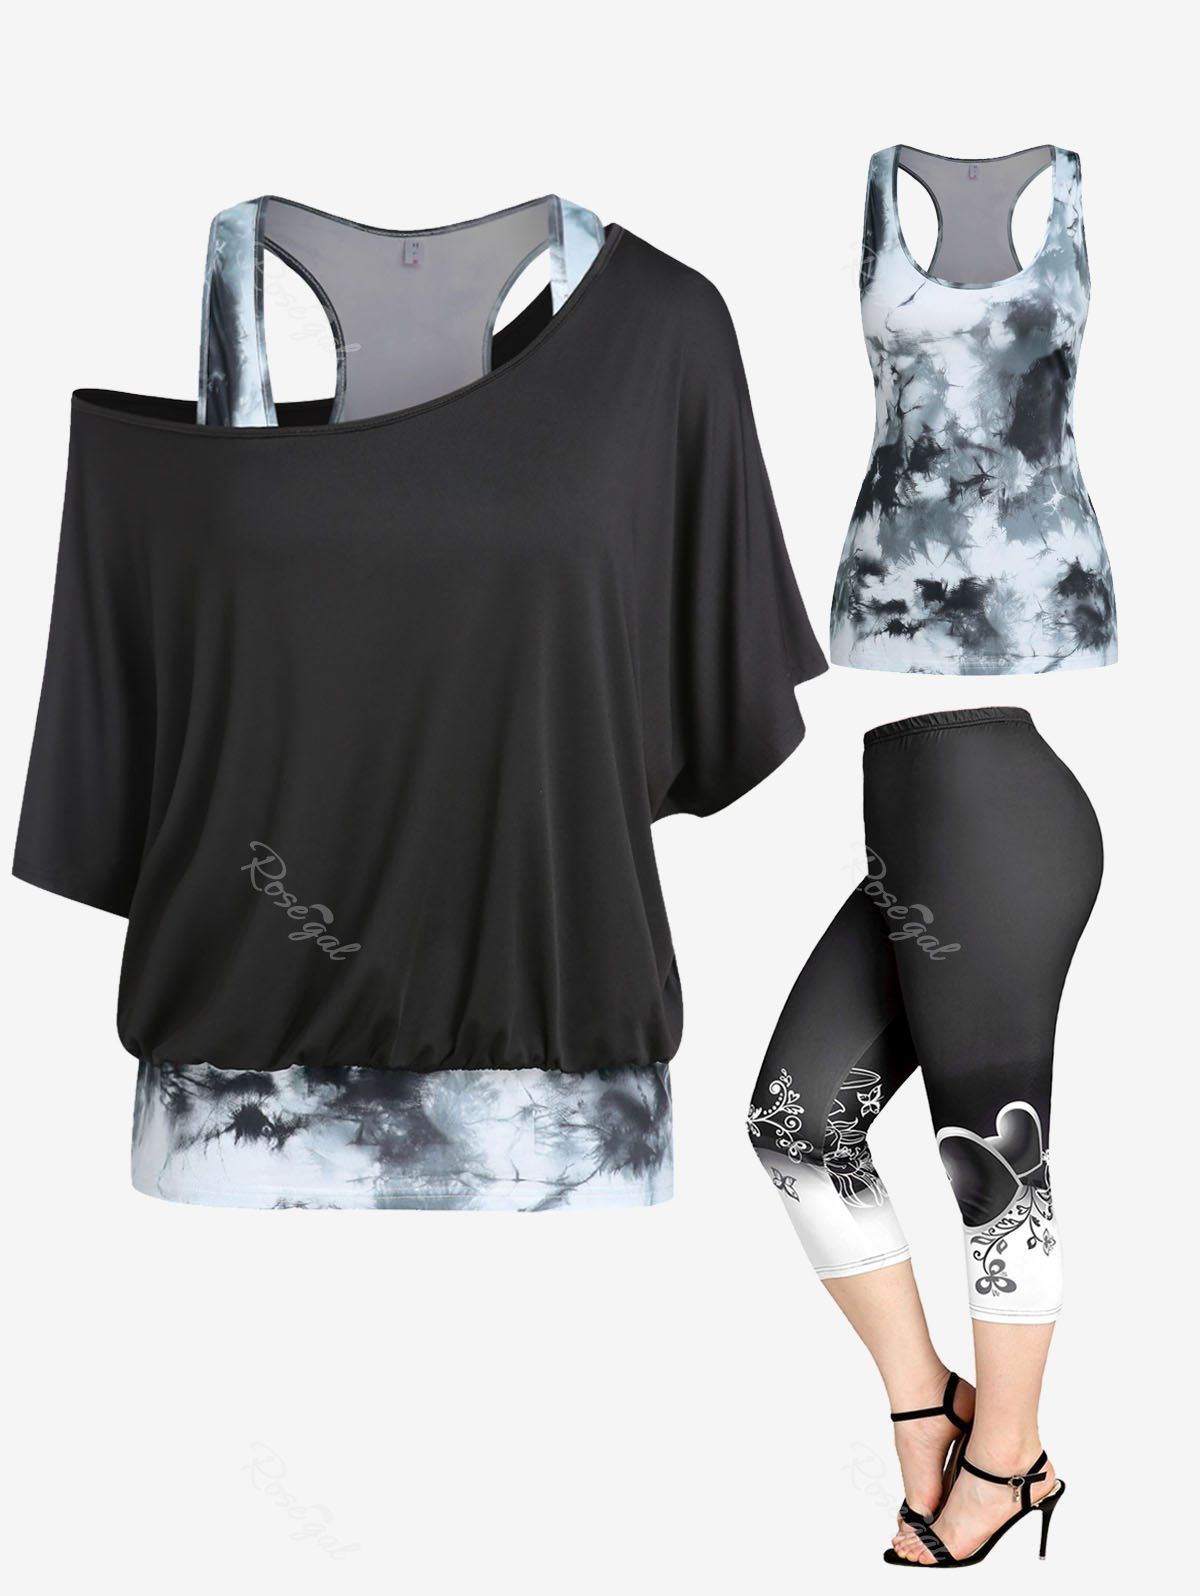 New Skew Neck Batwing Sleeve Tee and Tie Dye Racerback Tank Top Set and High Waist Heart Floral Print Capri Leggings Plus Size Summer Outfit  